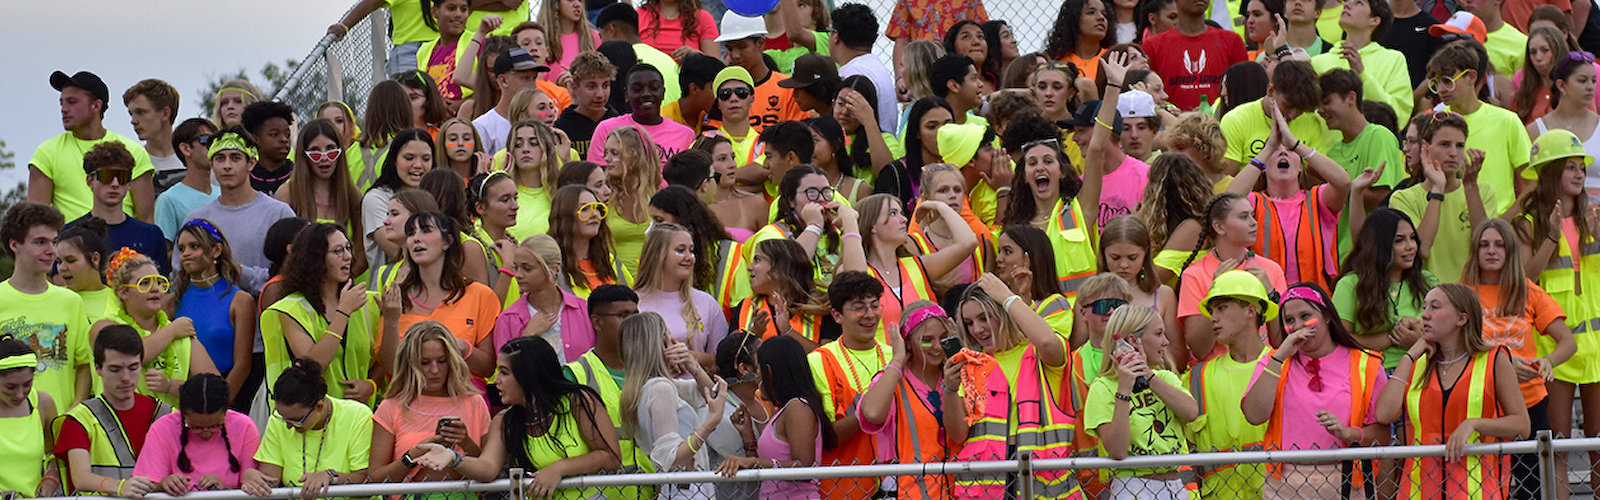 the student section of the football stadium full of students in brightly colored neon safety vests